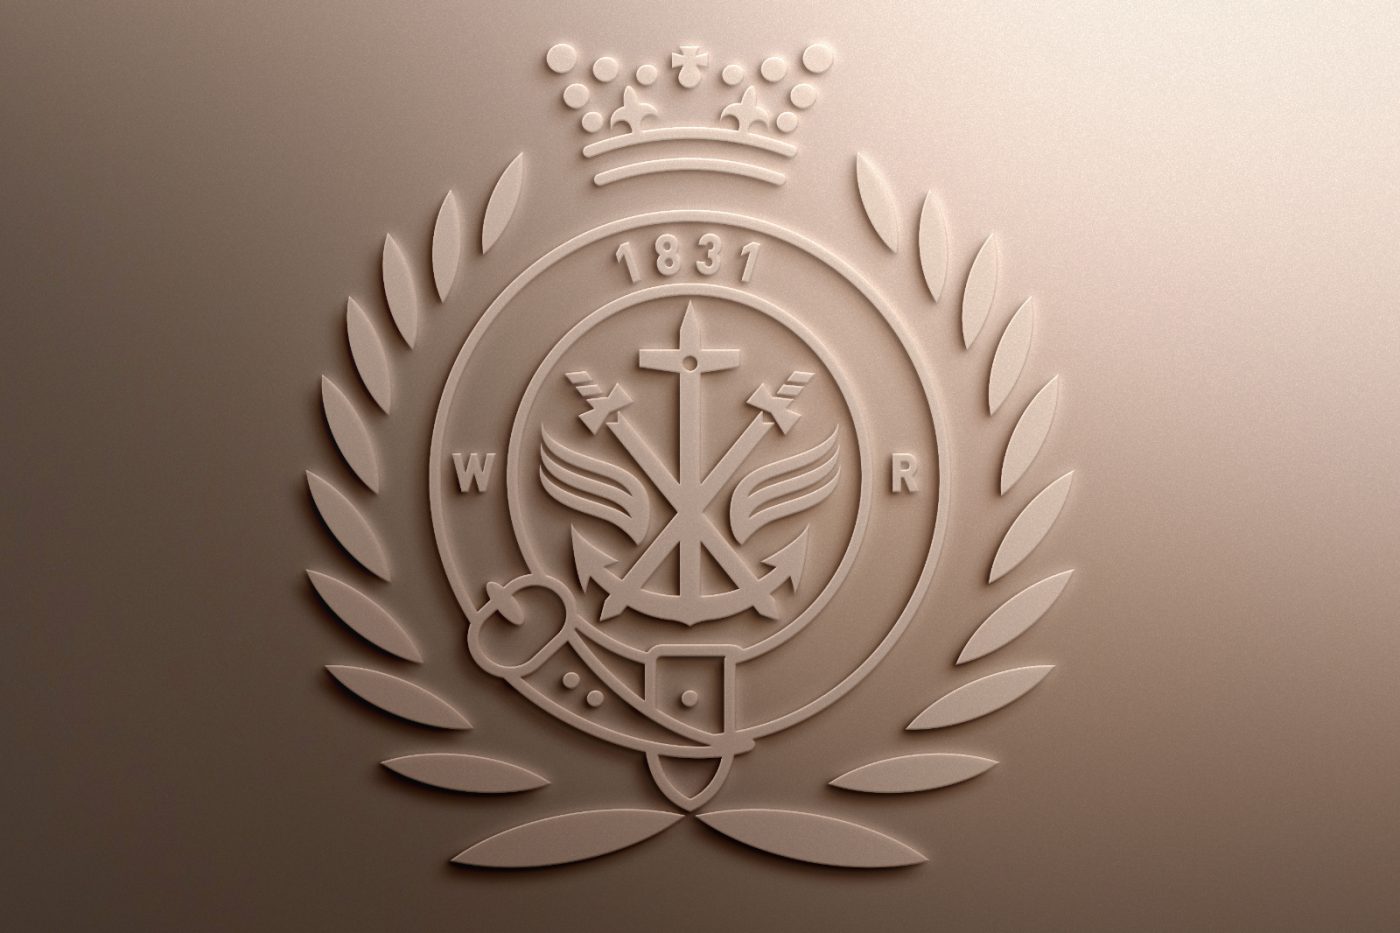 The Royal United Services Institute (RUSI)